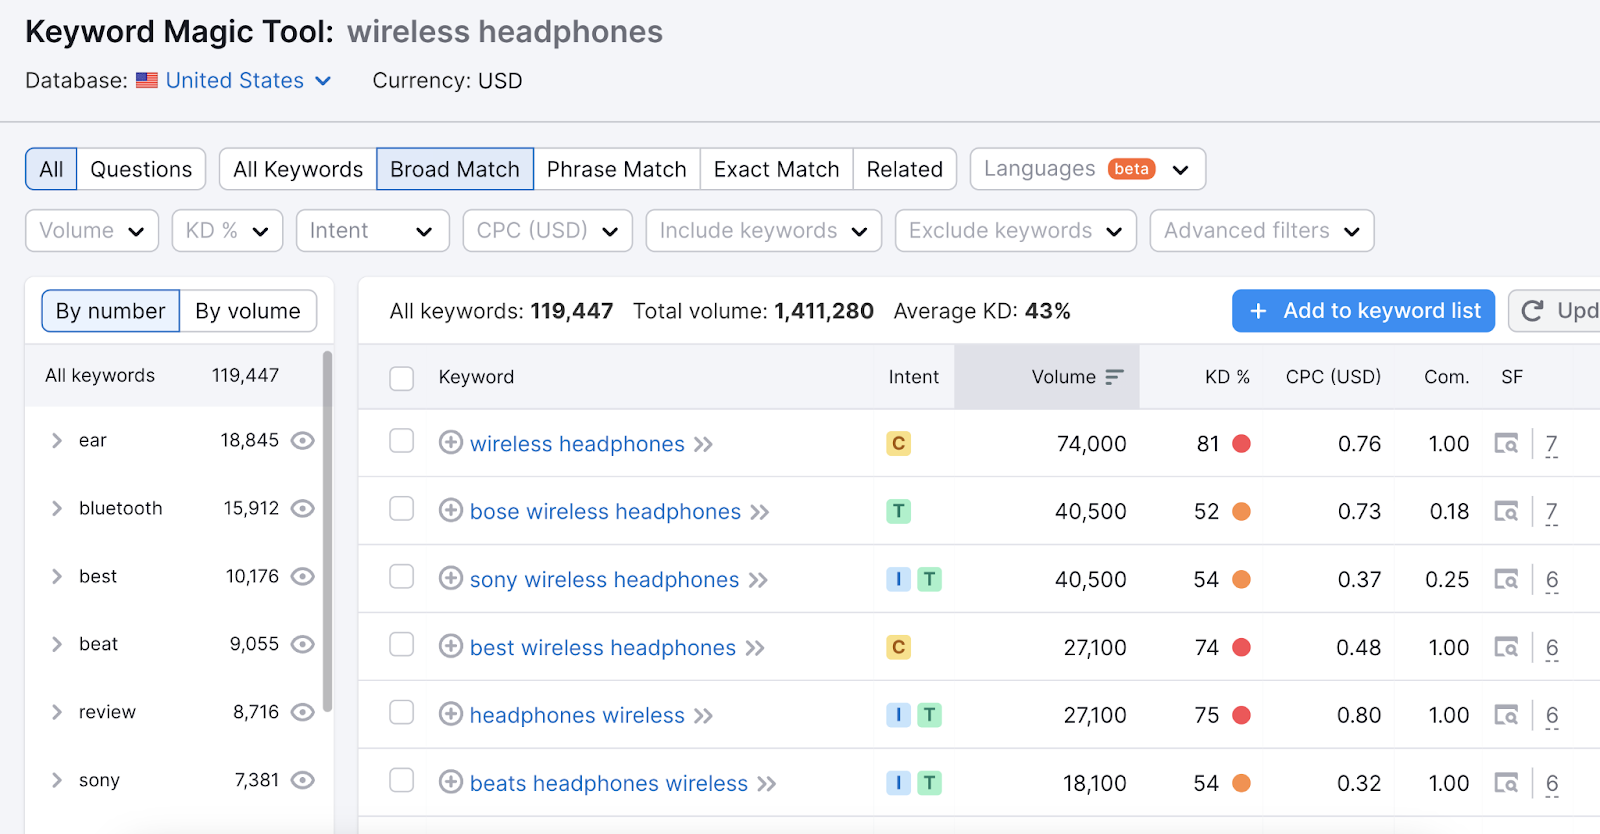 a database  of keyword ideas related to wireless headphones include, bose wireless headphones, sony wireless headphones, champion  wireless headphones, etc.